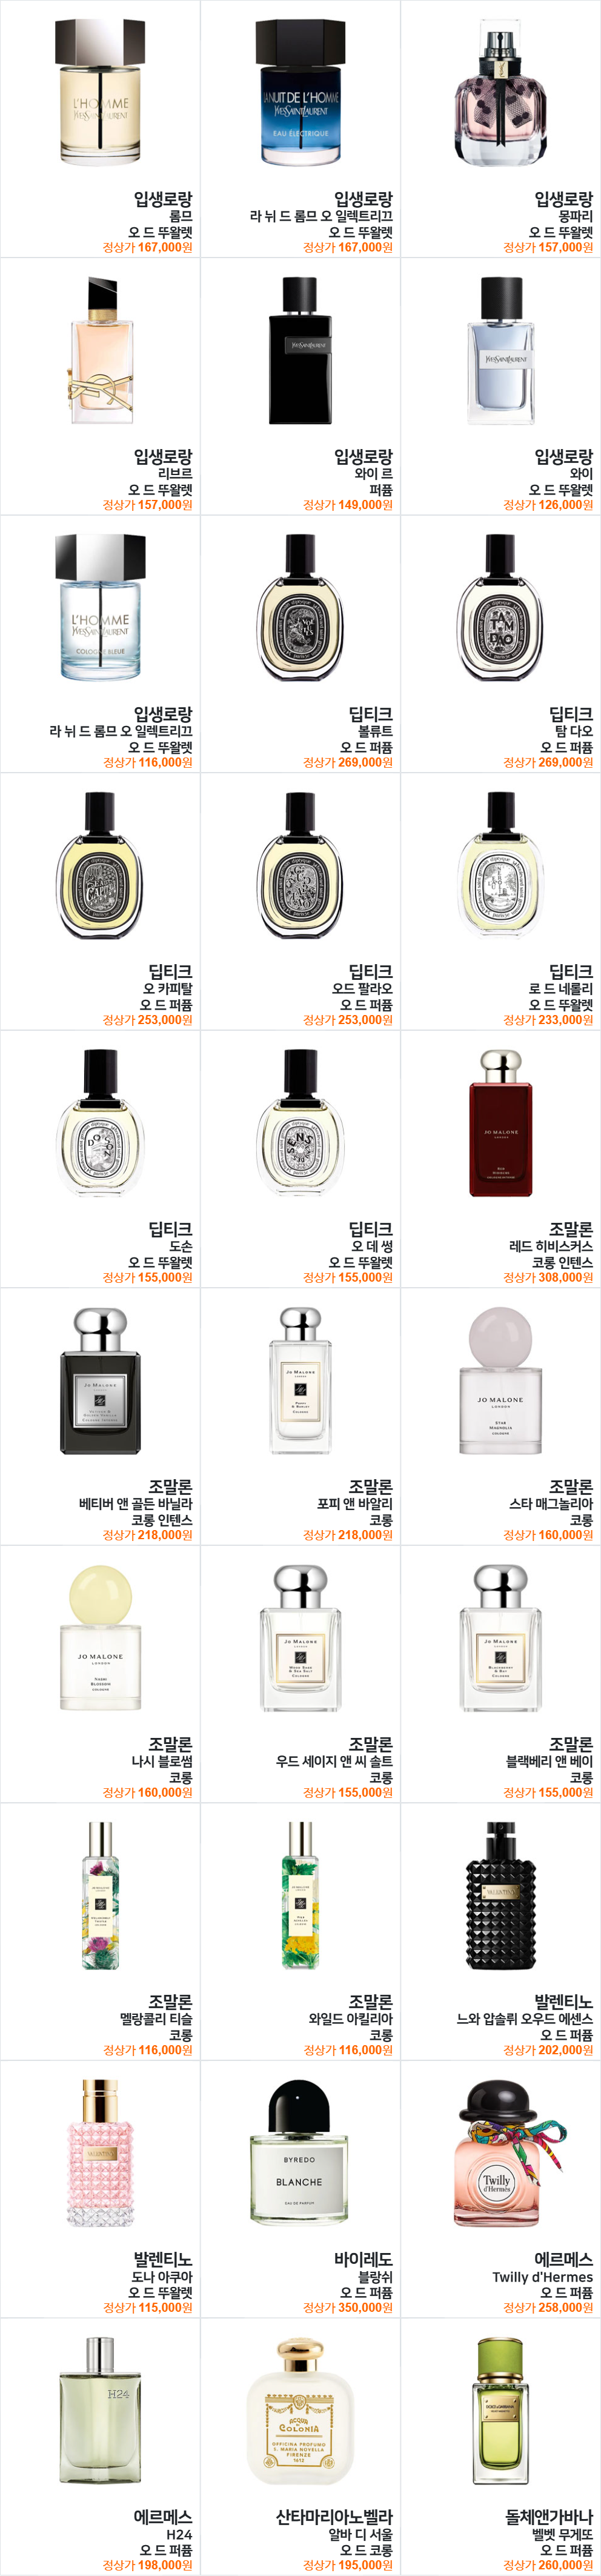 perfumeproduct3.png